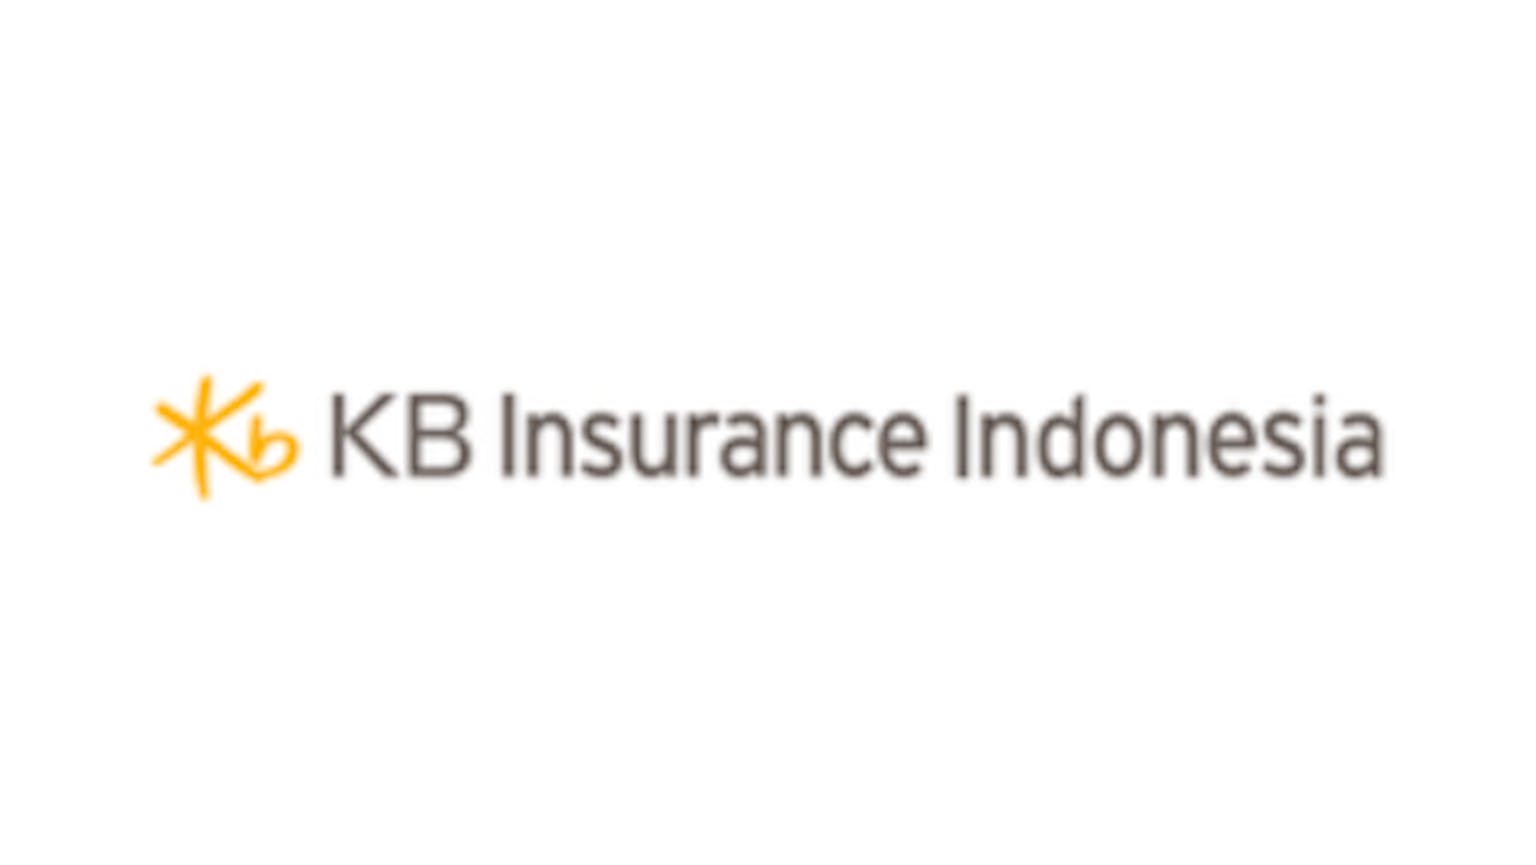 Property All Risk KB Insurance Indonesia